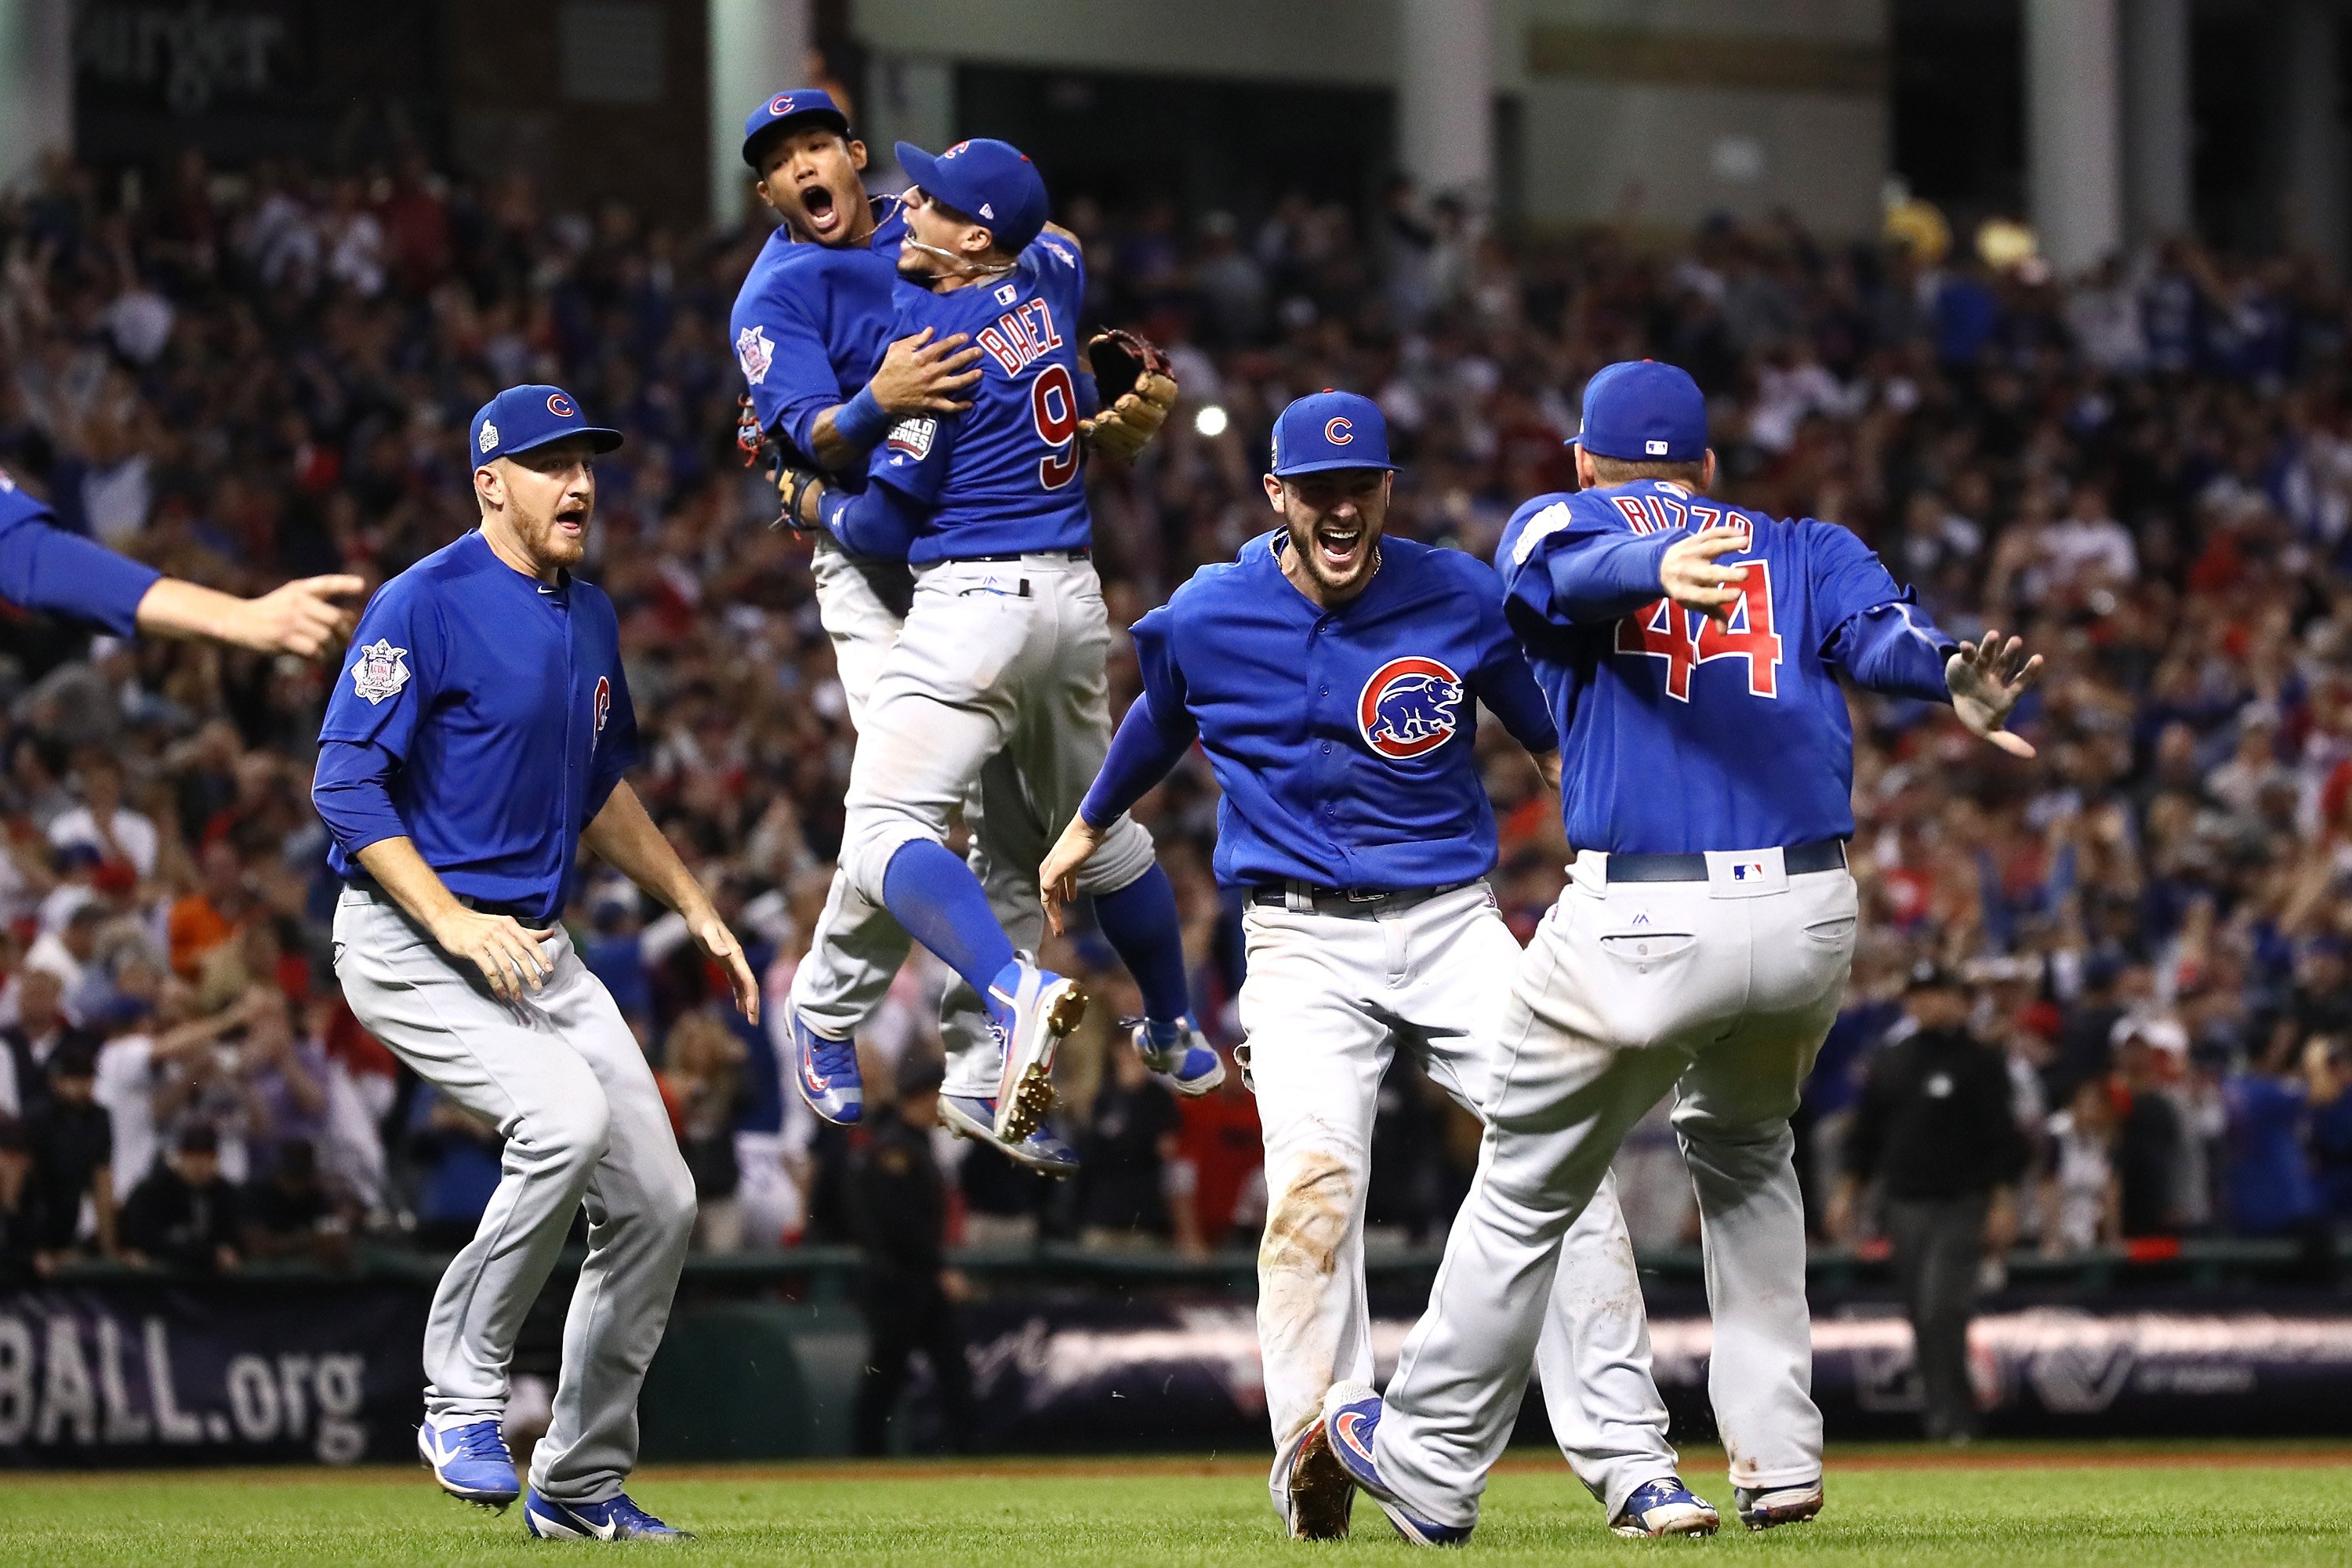 world-series-chicago-cubs-cleveland-indians-game-7-2.jpg